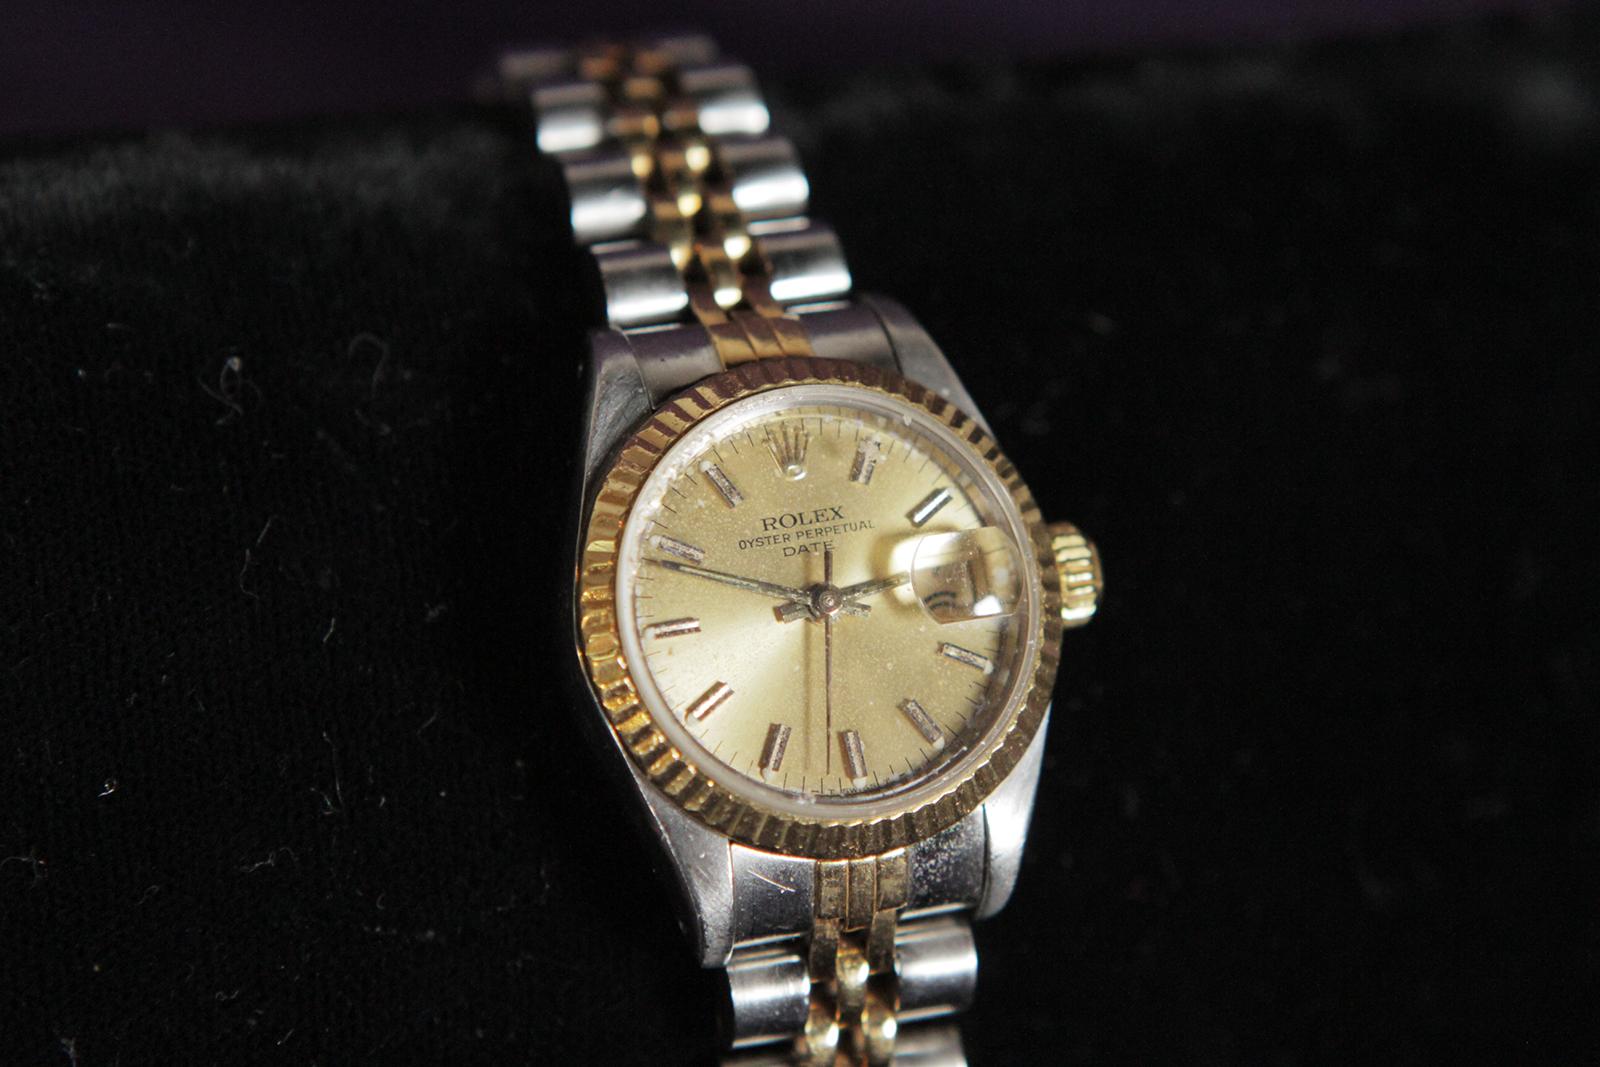 Vintage ladies oyster perpetual 14-karat gold and stainless Rolex watch in working order
Very good original condition model #69173, 6